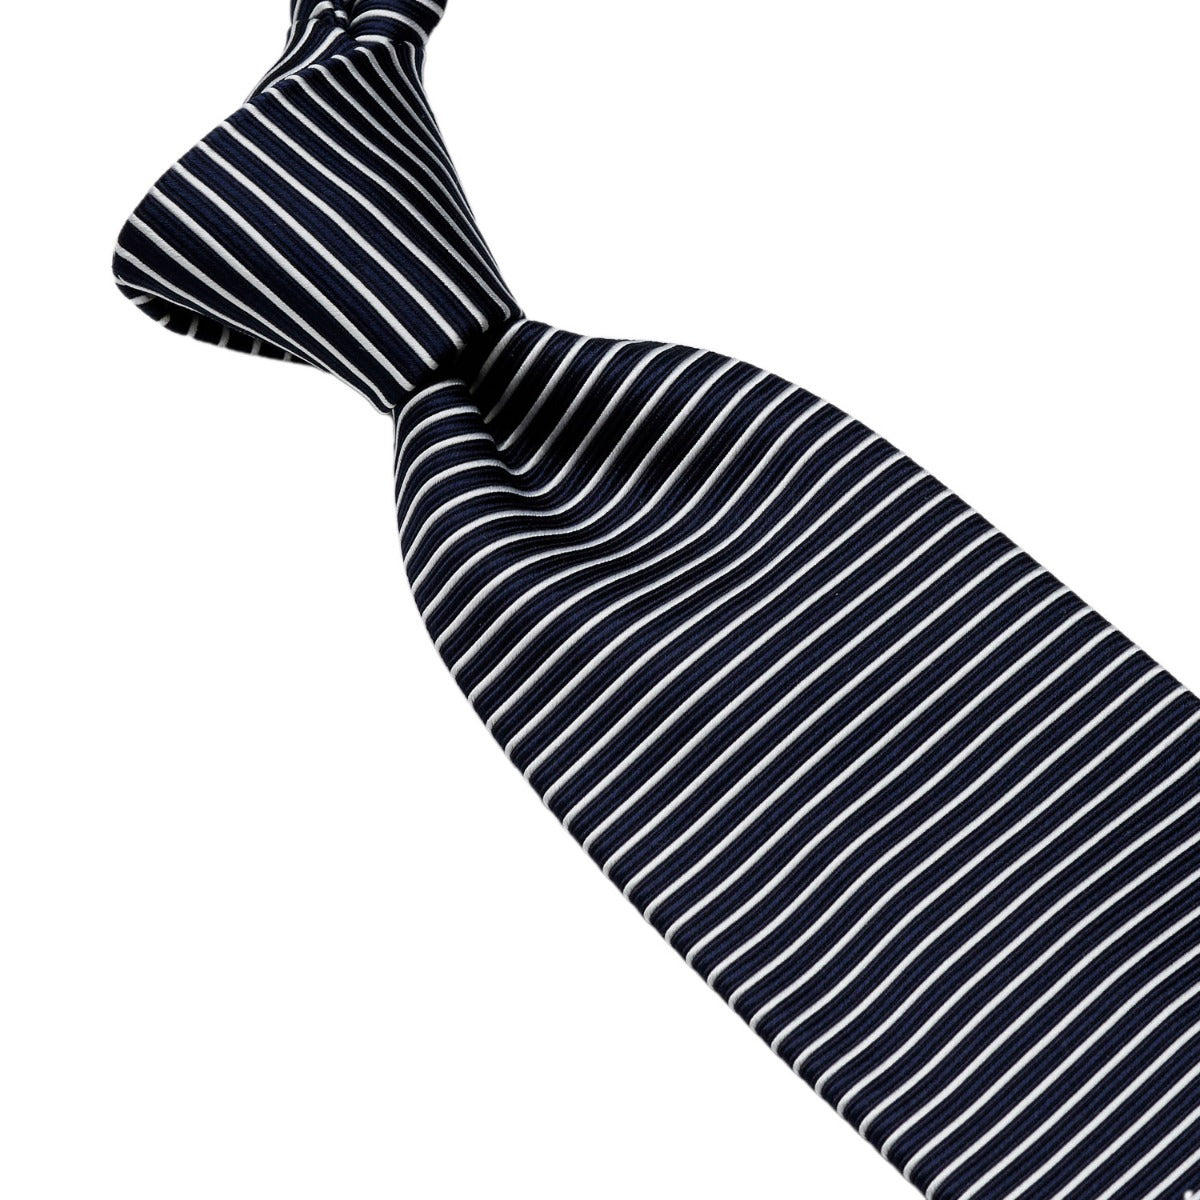 A Sovereign Grade Horizontal Stripe Jacquard Tie from KirbyAllison.com on a white background.